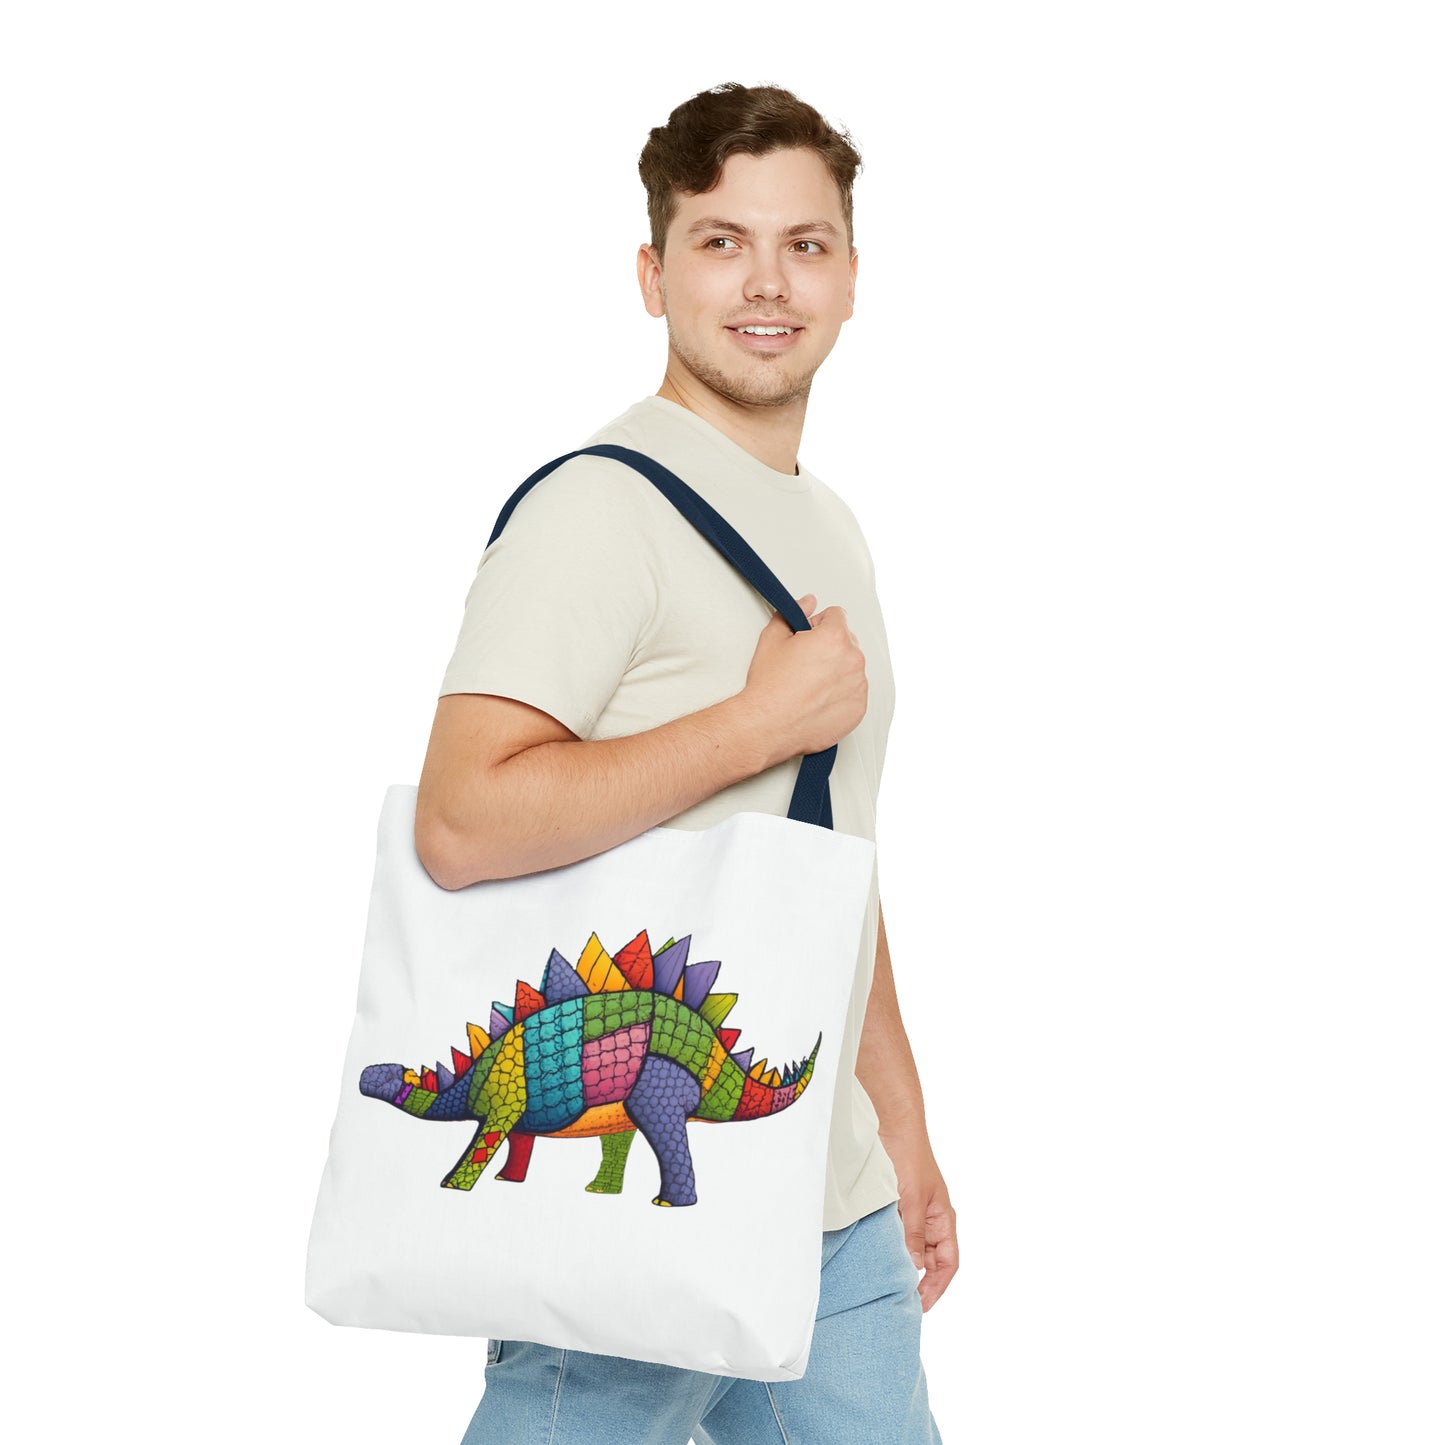 Sewn Scales: Patchwork Stegosaurus Delight Tote Bag